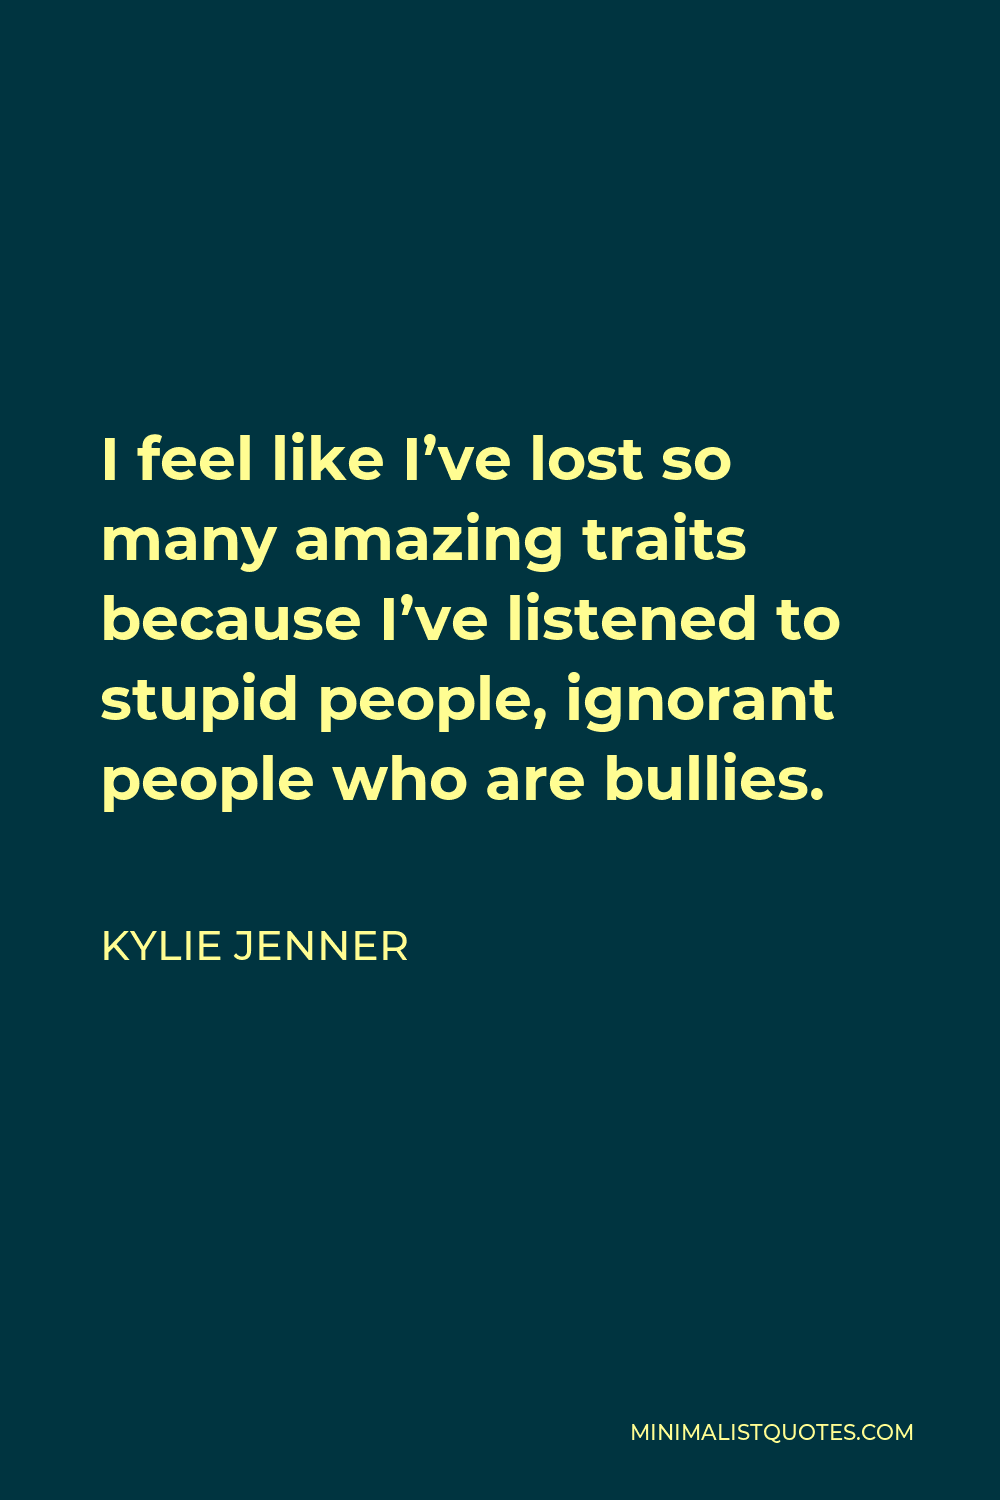 Kylie Jenner Quote - I feel like I’ve lost so many amazing traits because I’ve listened to stupid people, ignorant people who are bullies.